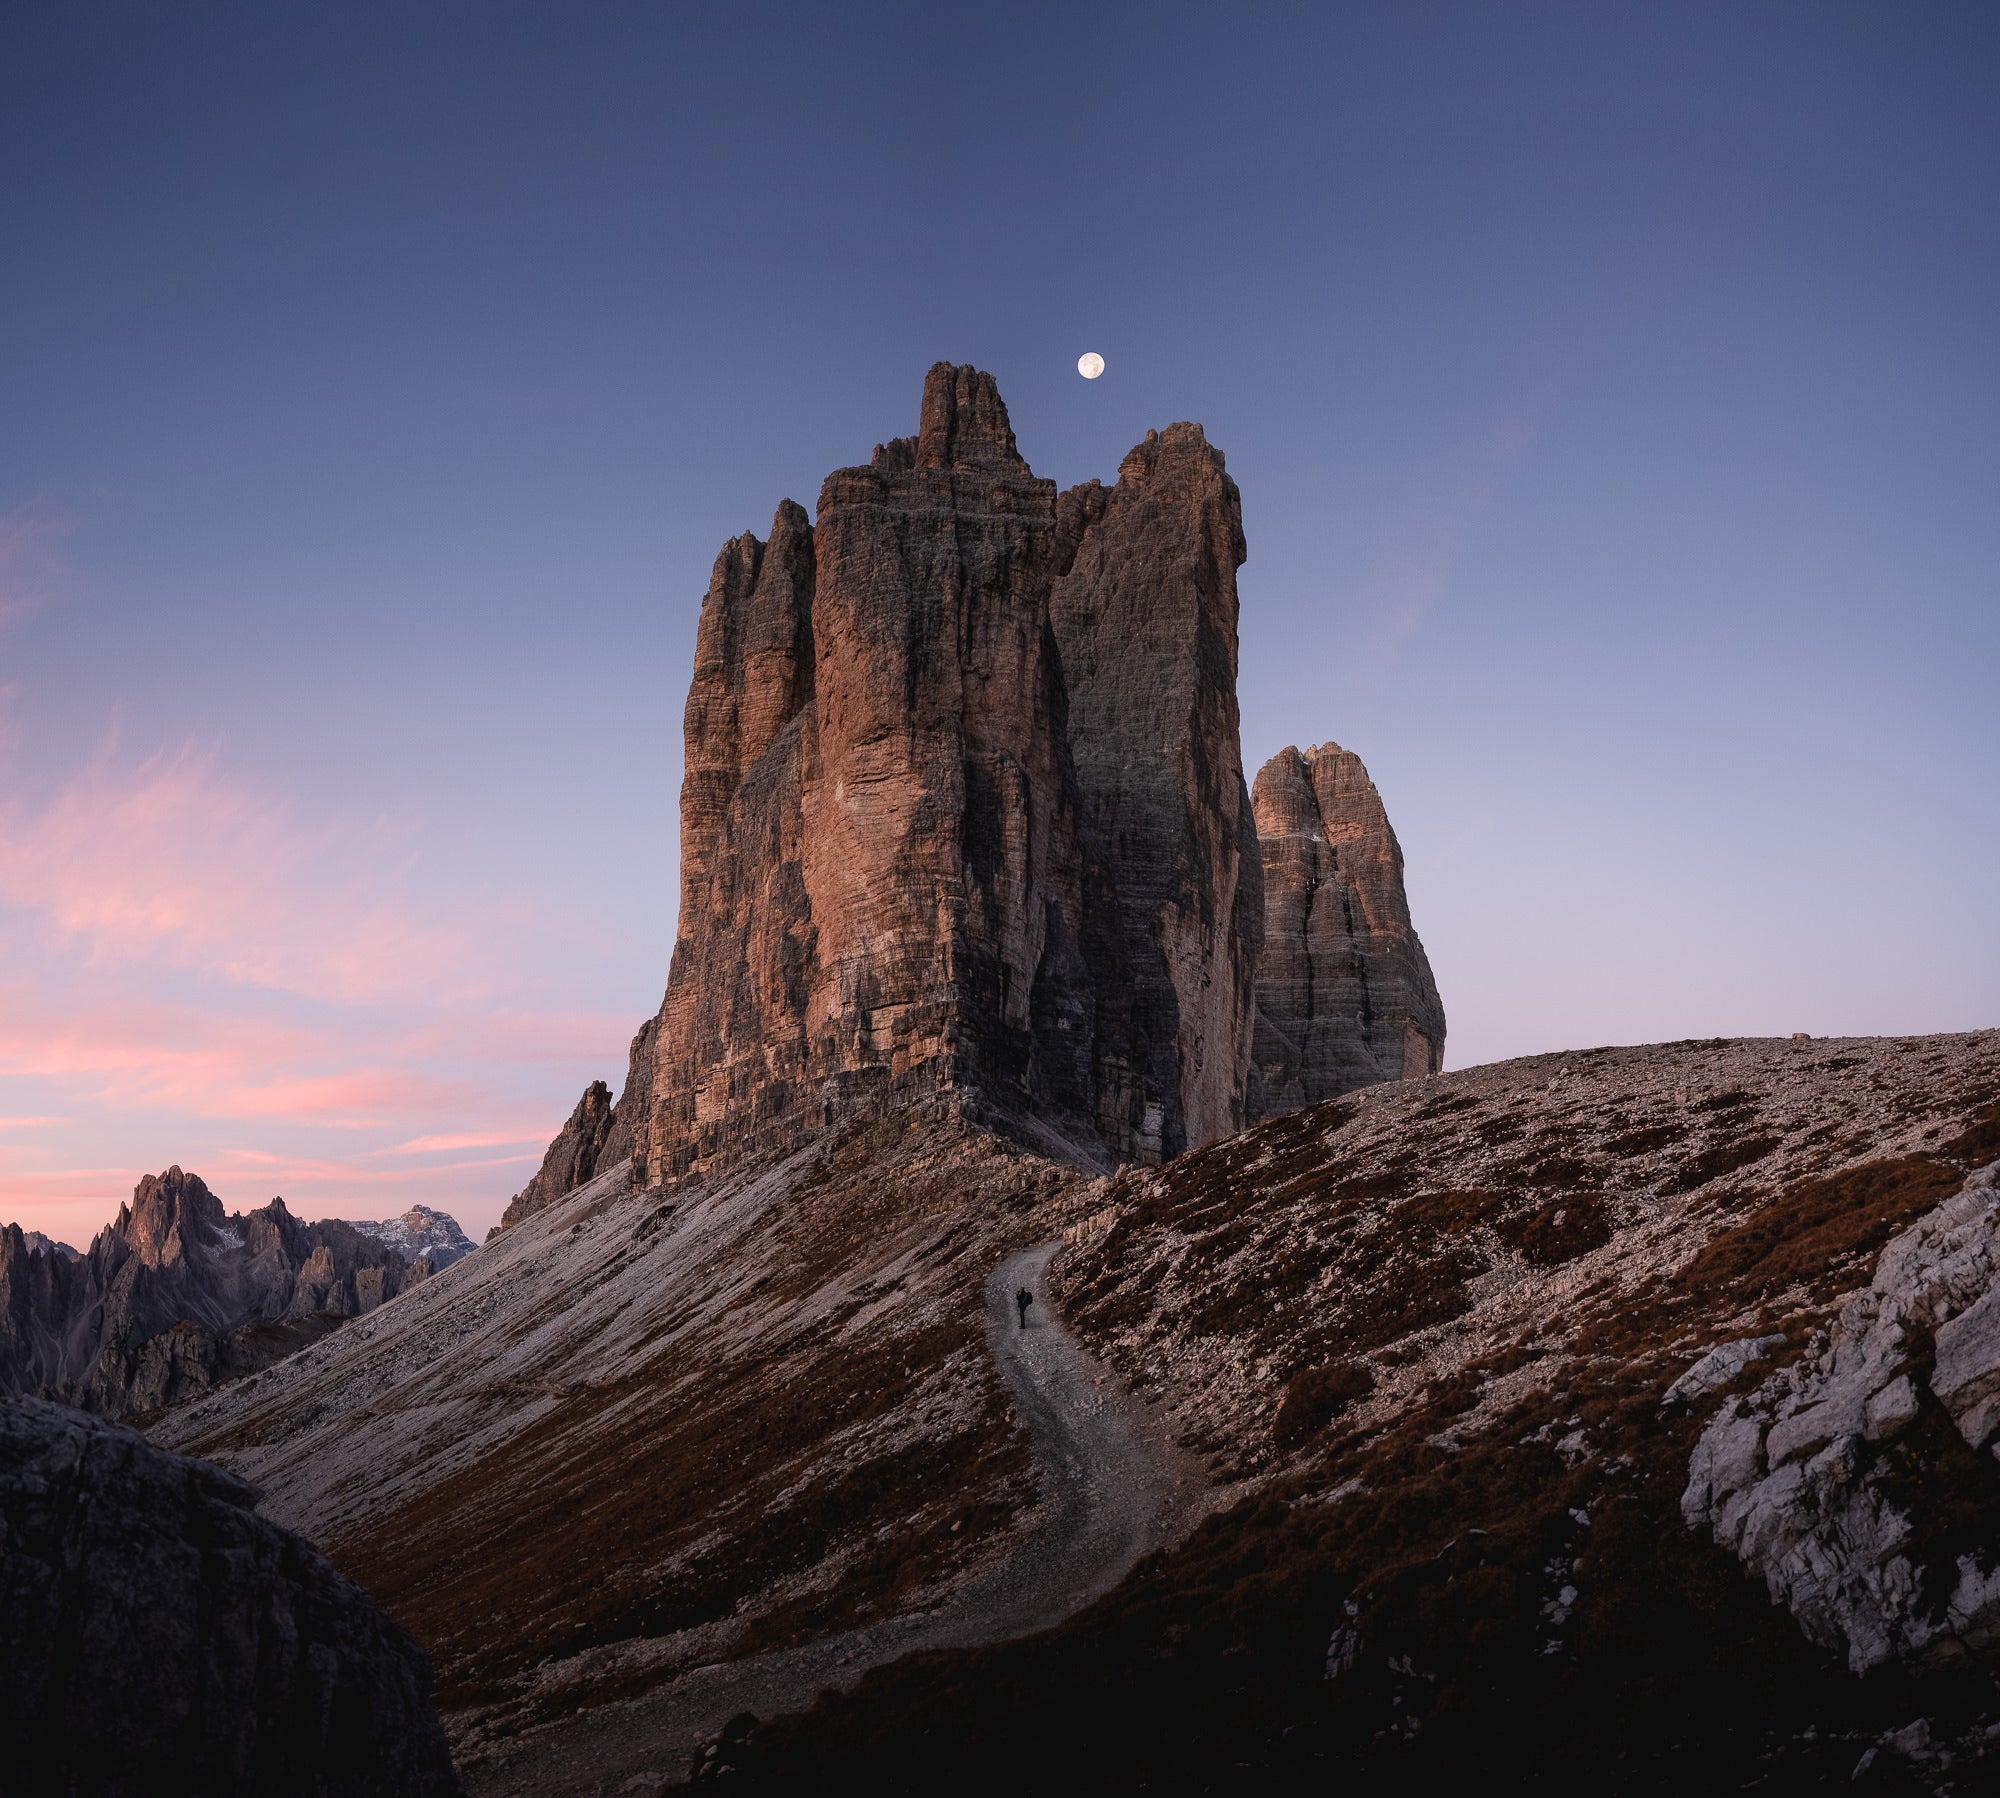 Alpha-Universe-WIMB-Daryl-Scott-Walker-2470GMII-1
“Dolomiti Tre Cime, catching a lone walker heading up to The Time during the morning blue hour.” Photo by Daryl Scott Walker. Sony Alpha 7 IV. Sony 24-70mm f/2.8 G Master II. 1/160-sec, f/2.8, ISO 500